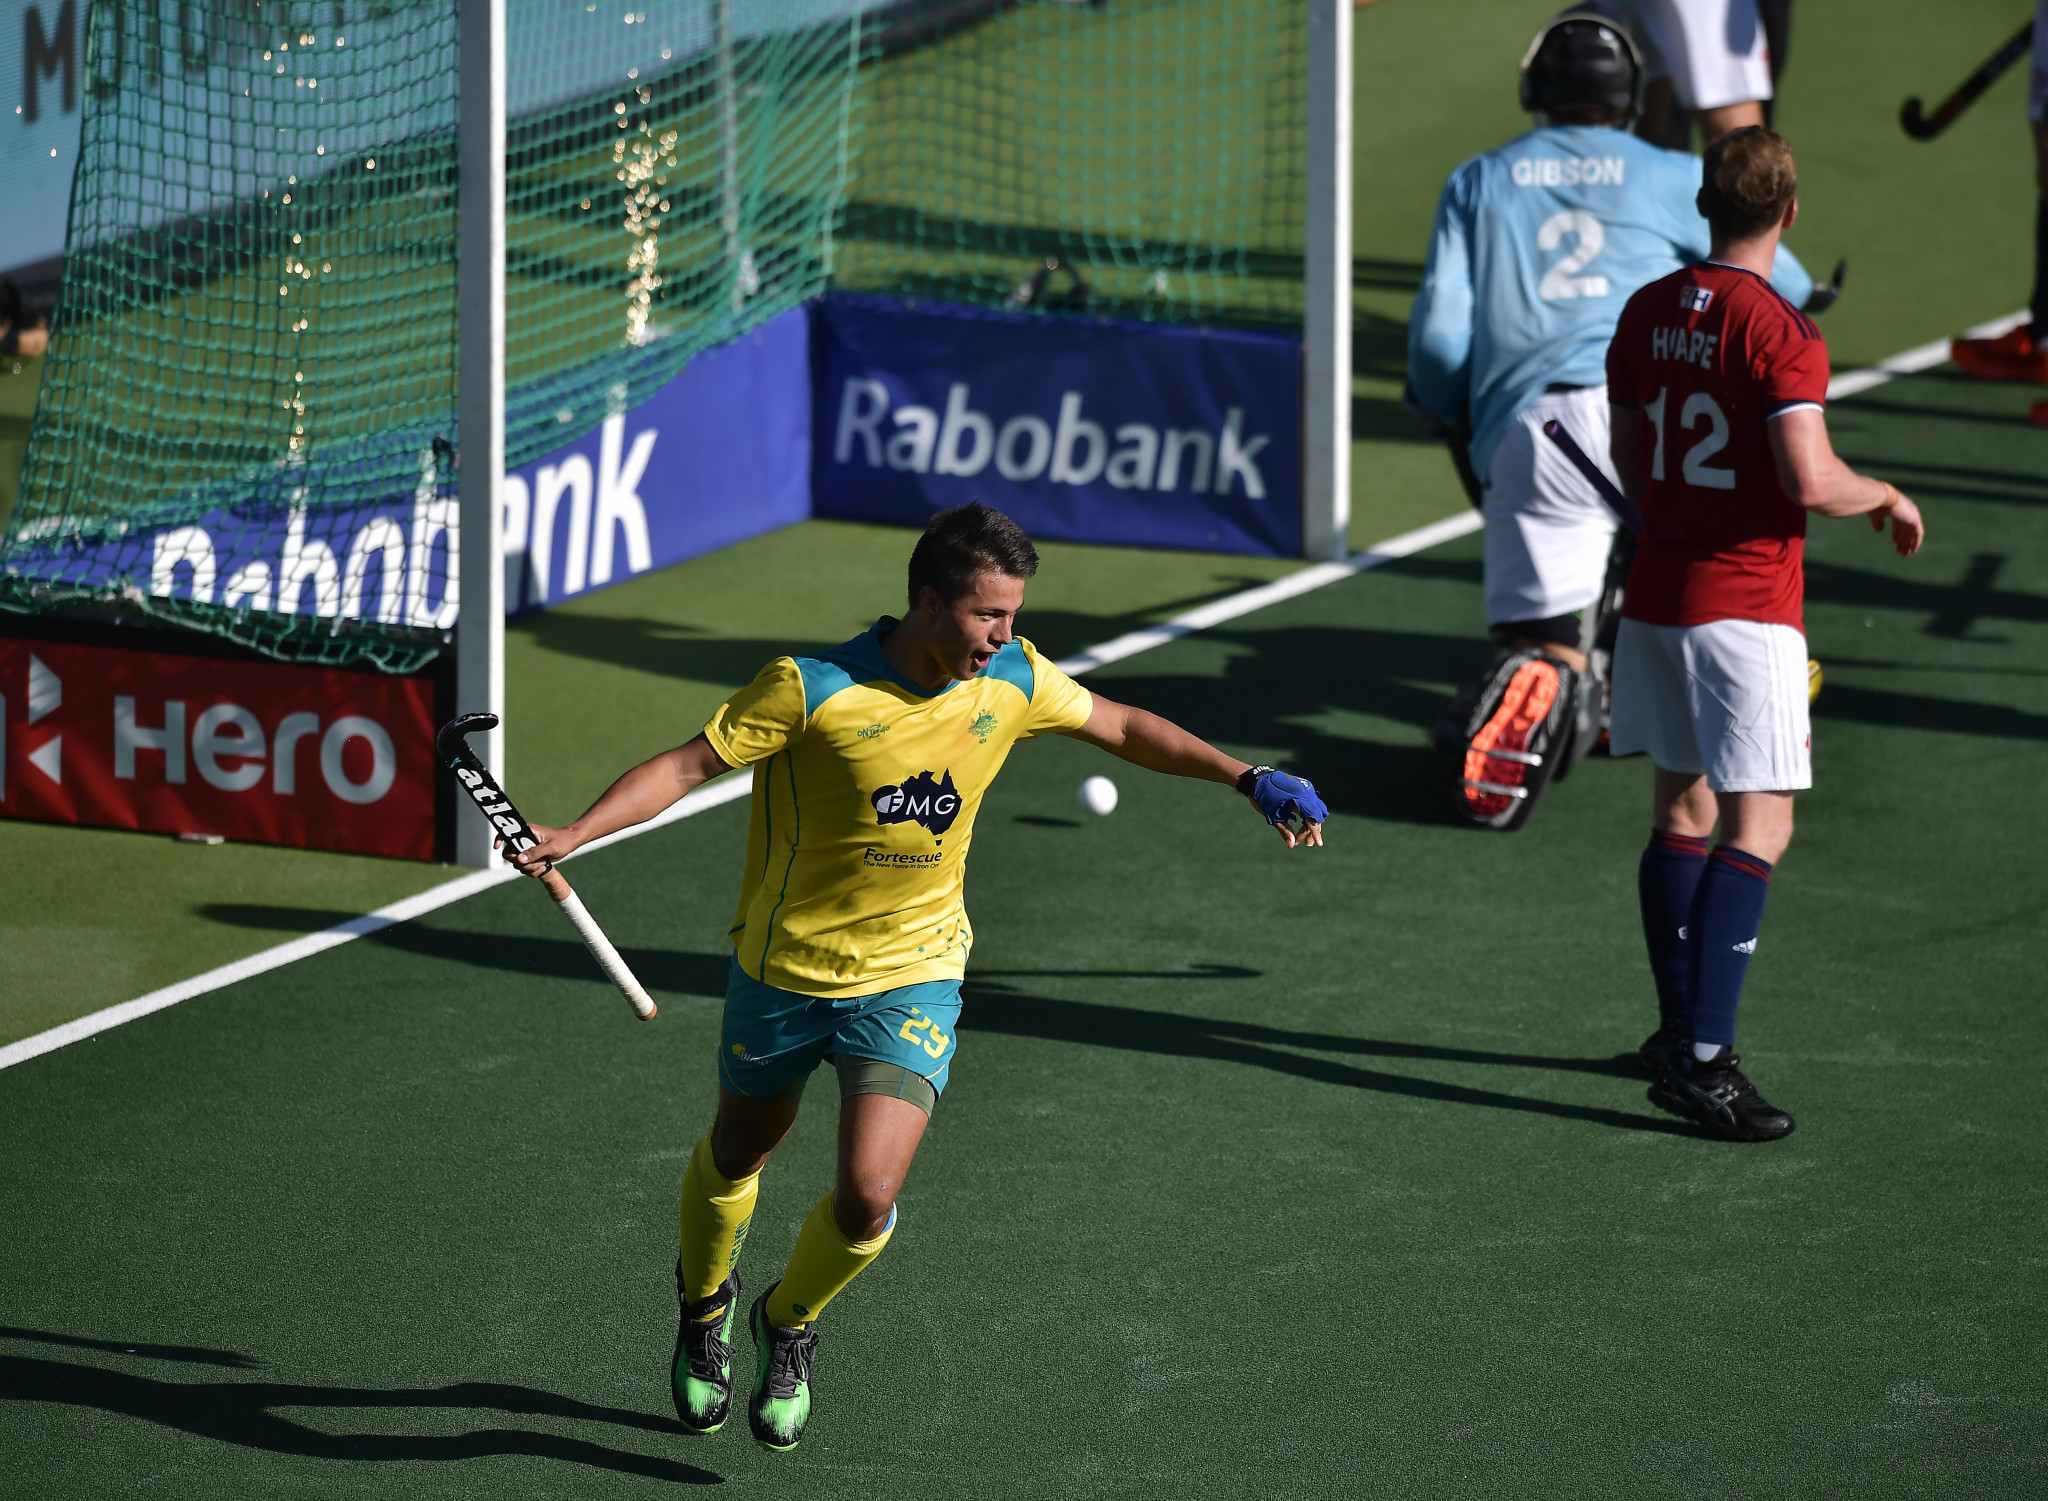 The International Hockey Federation is currently reviewing its budgets ©Getty Images